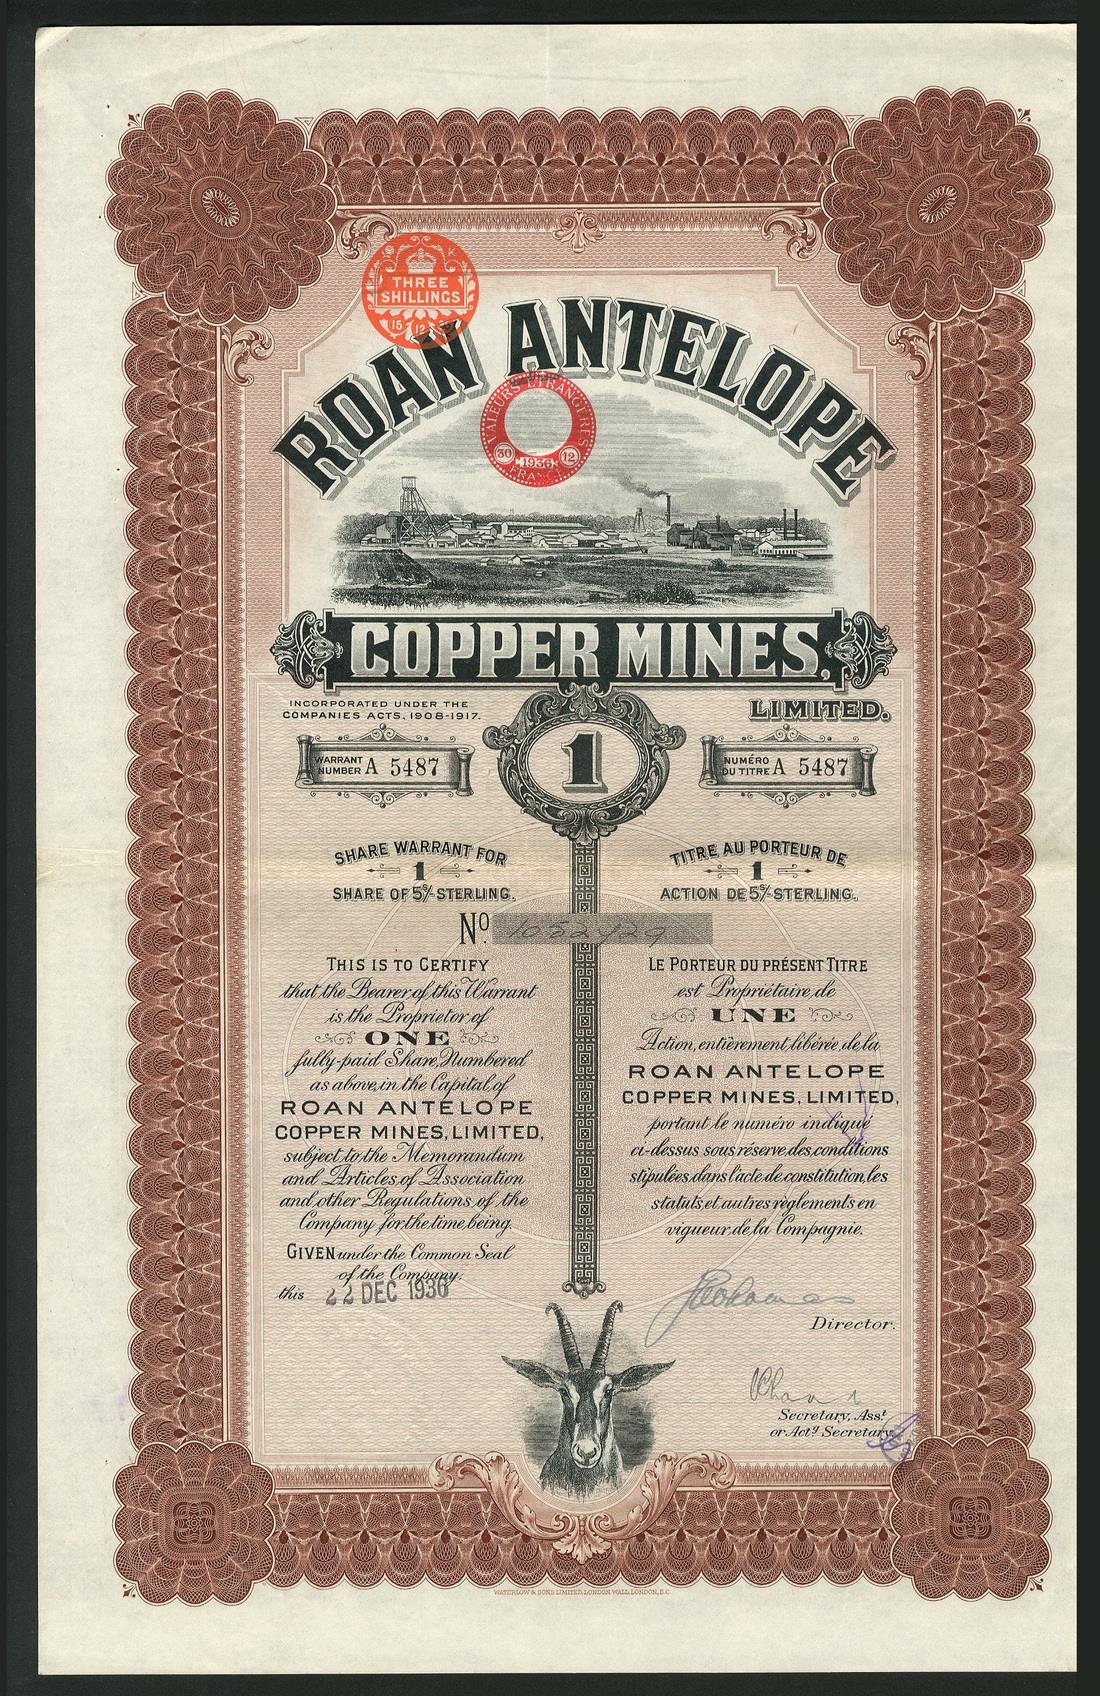 Roan Antelope Copper Mines Ltd., a set of 6 certificates for 1 share and 5 shares (5) of 5 shillings - Image 2 of 2